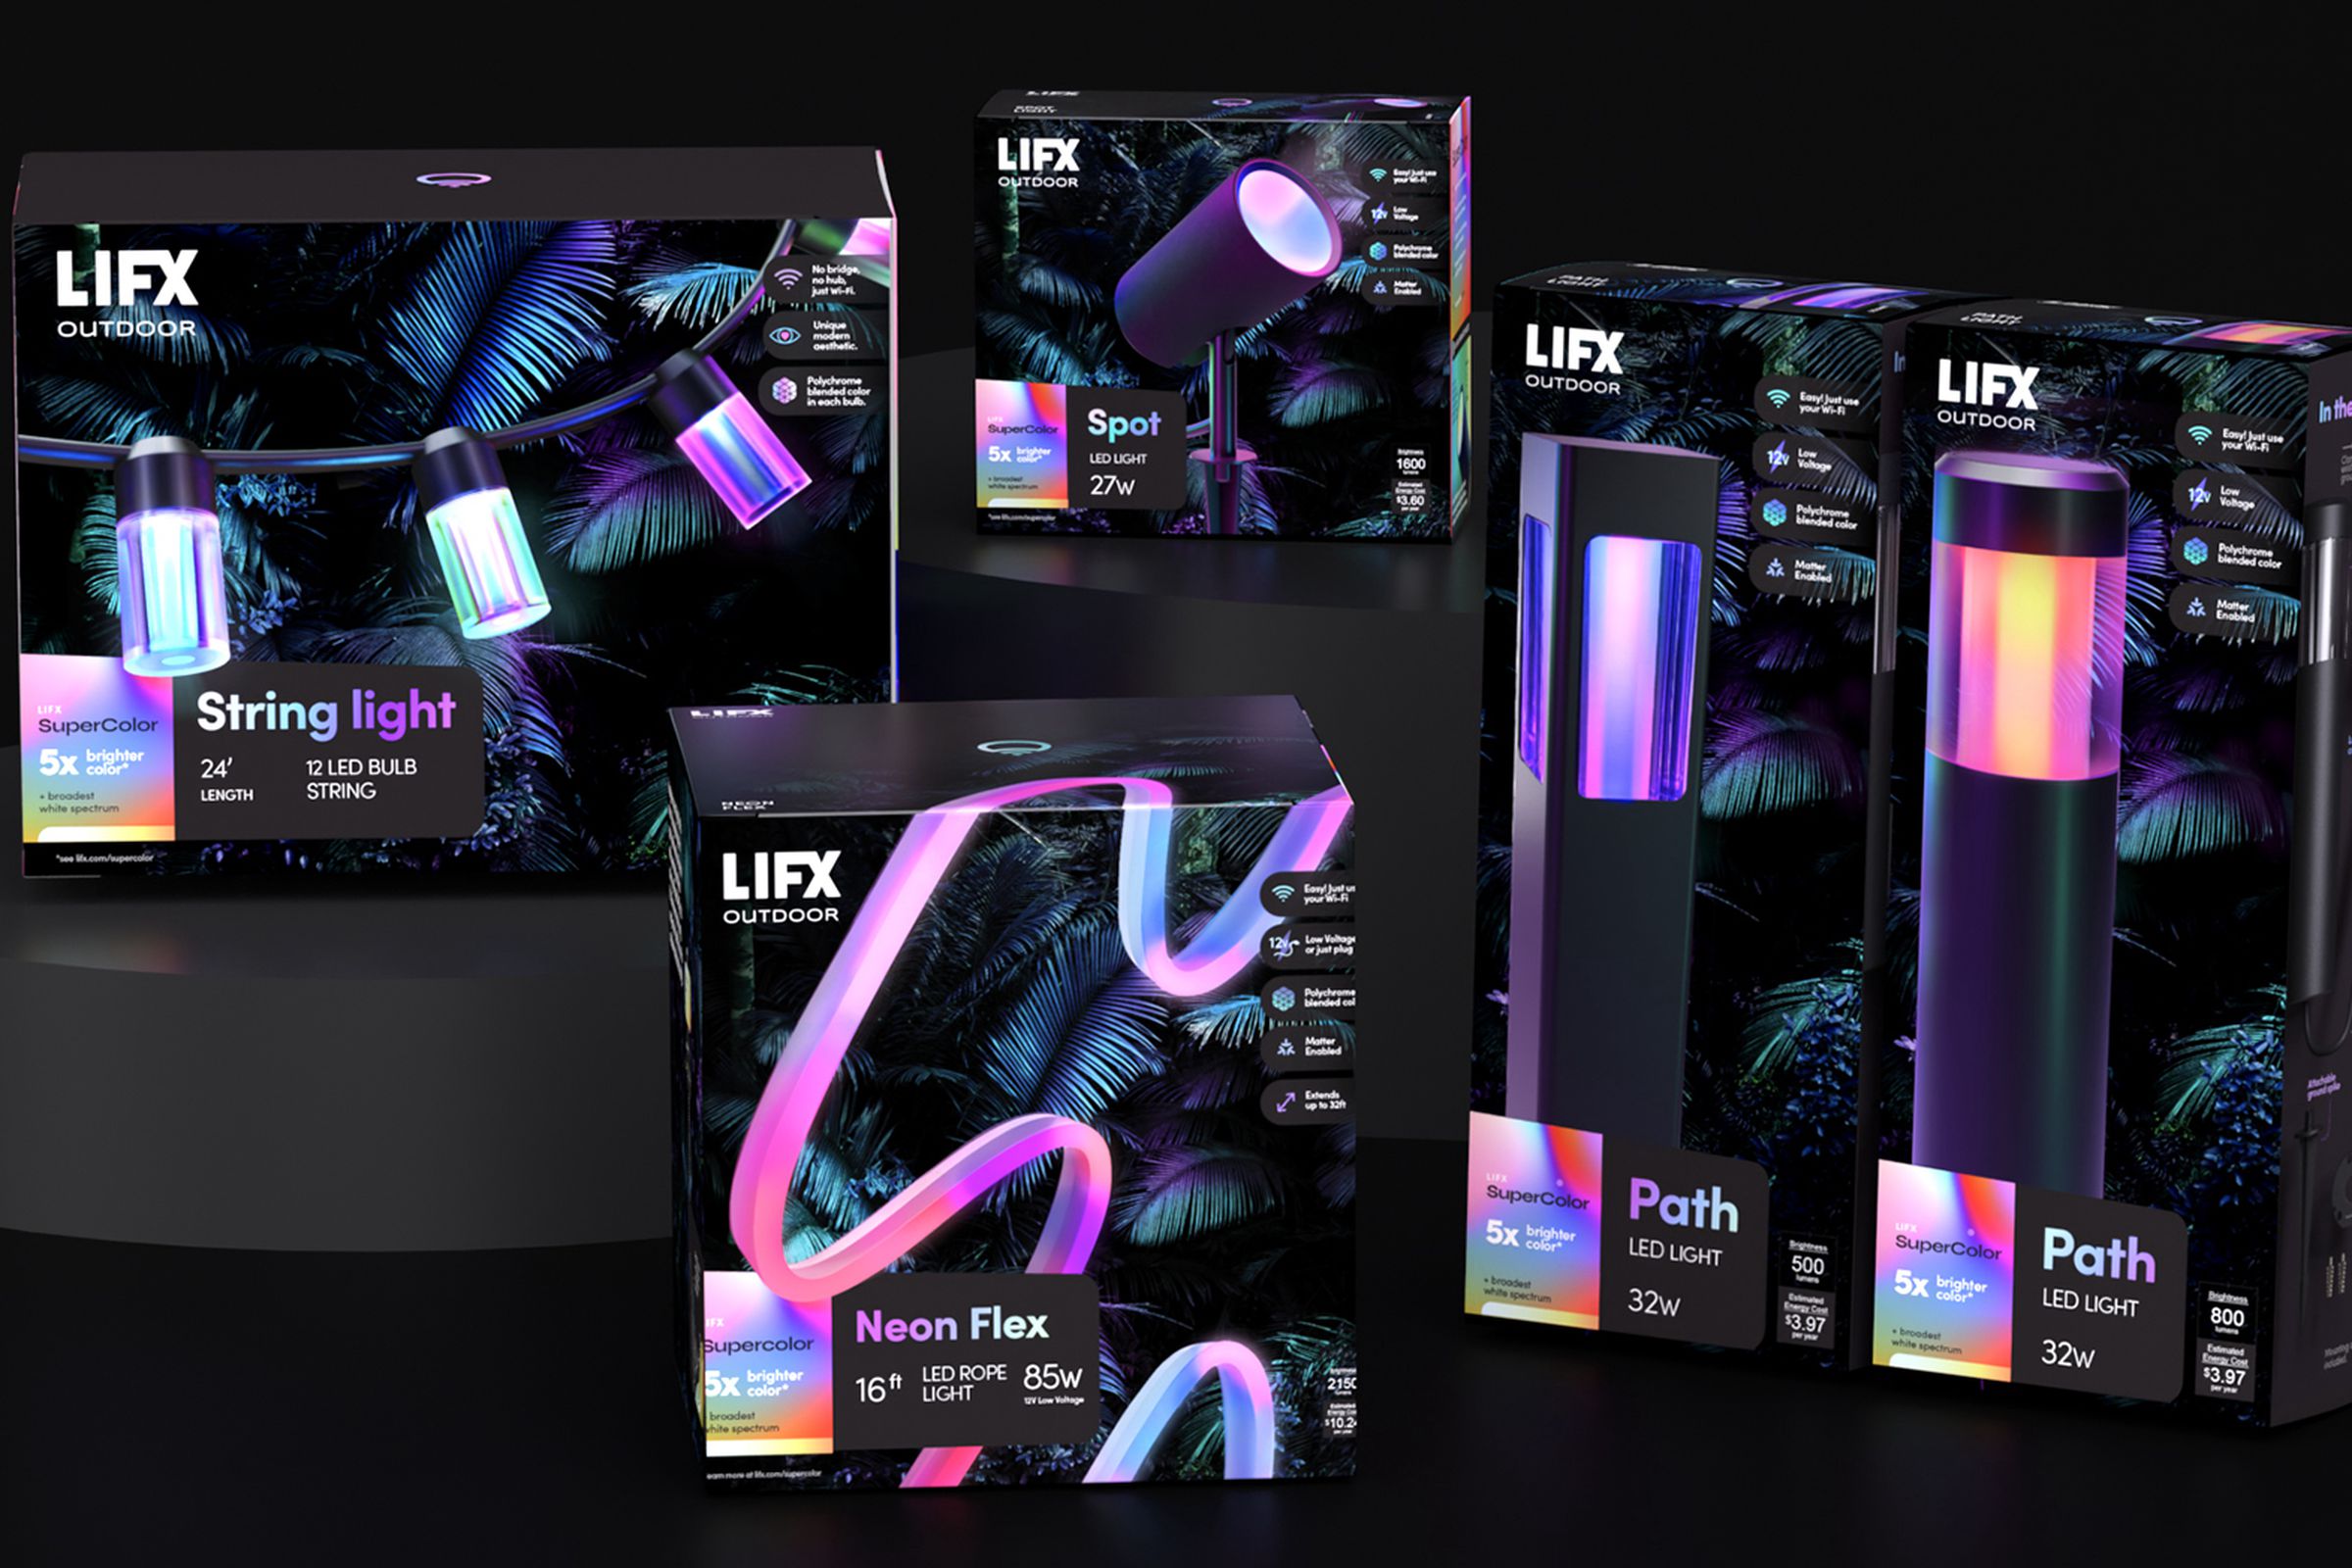 Lifx has a new outdoor line of smart lighting that supports Matter.